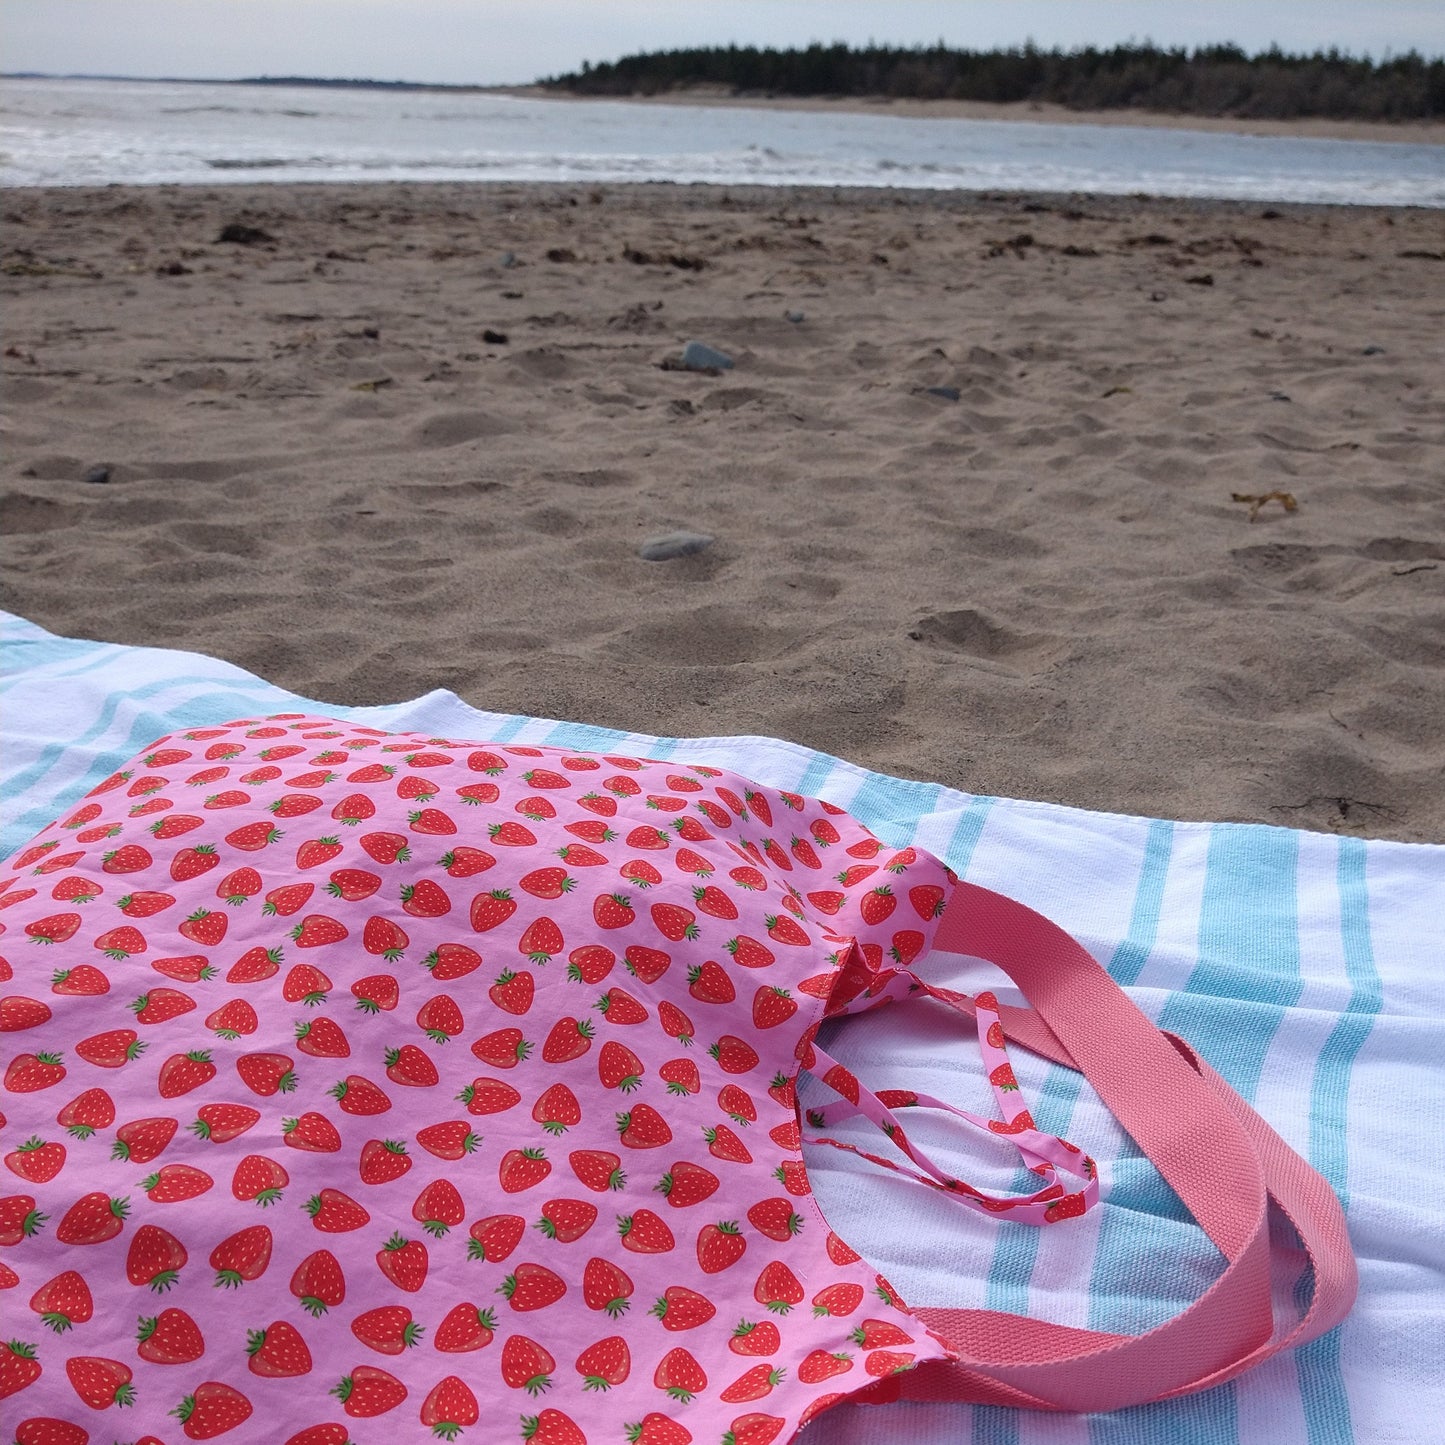 Shopping/Beach bag, reversible, size large, pink strawberries (Handmade in Canada)